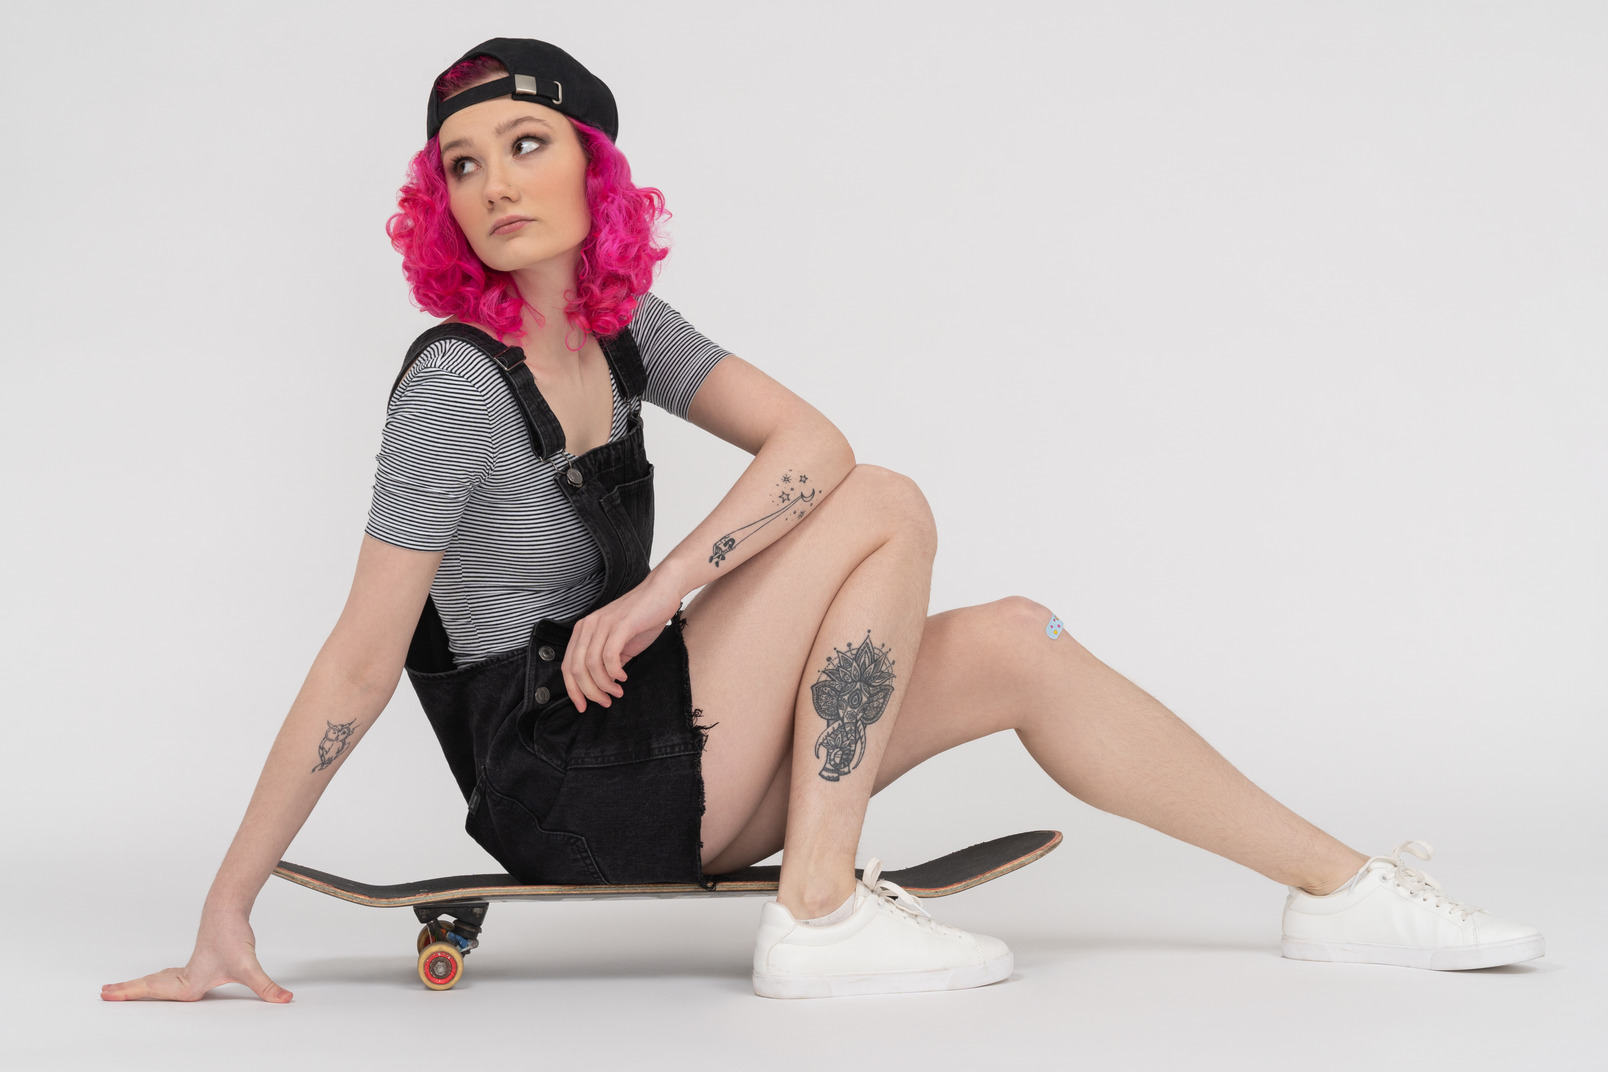 Tattooed girl with pink hair sitting on a skateboard